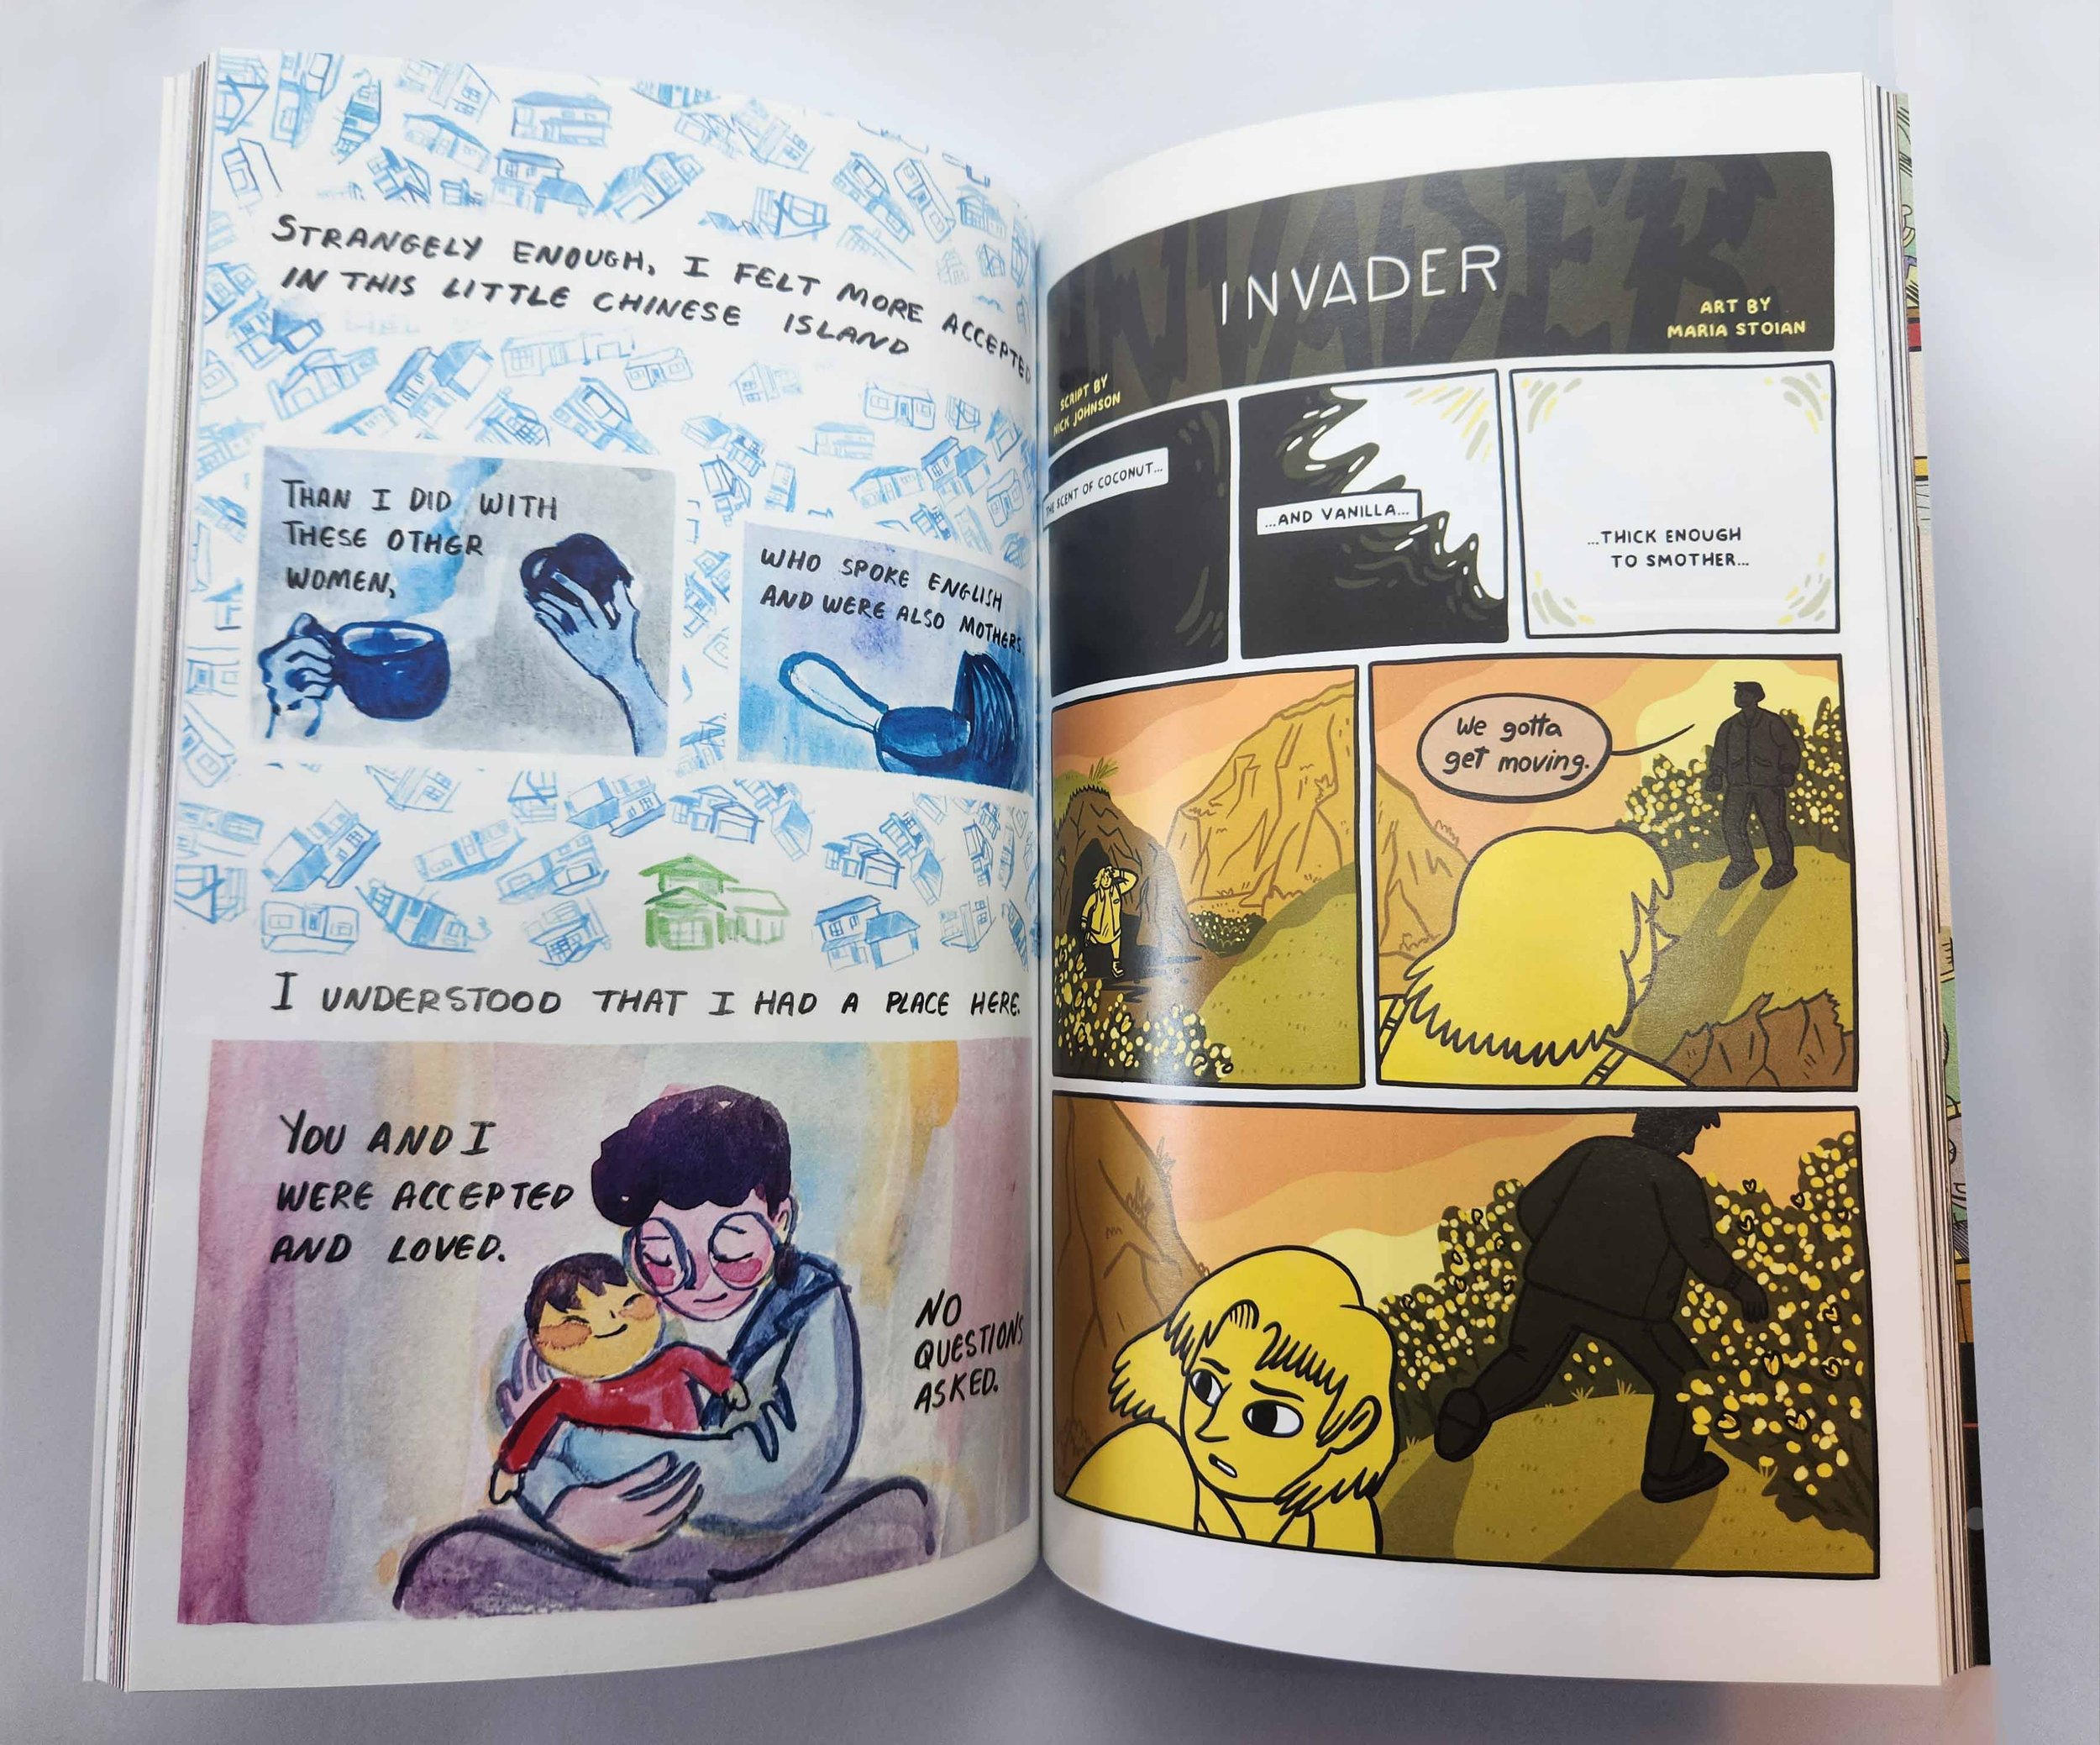  An open spread from the book featuring the last page of Debra King and Naomi Fong story “Arrival,” and the first page of “Invader” by Nick Johnson and Maria Stoian. 